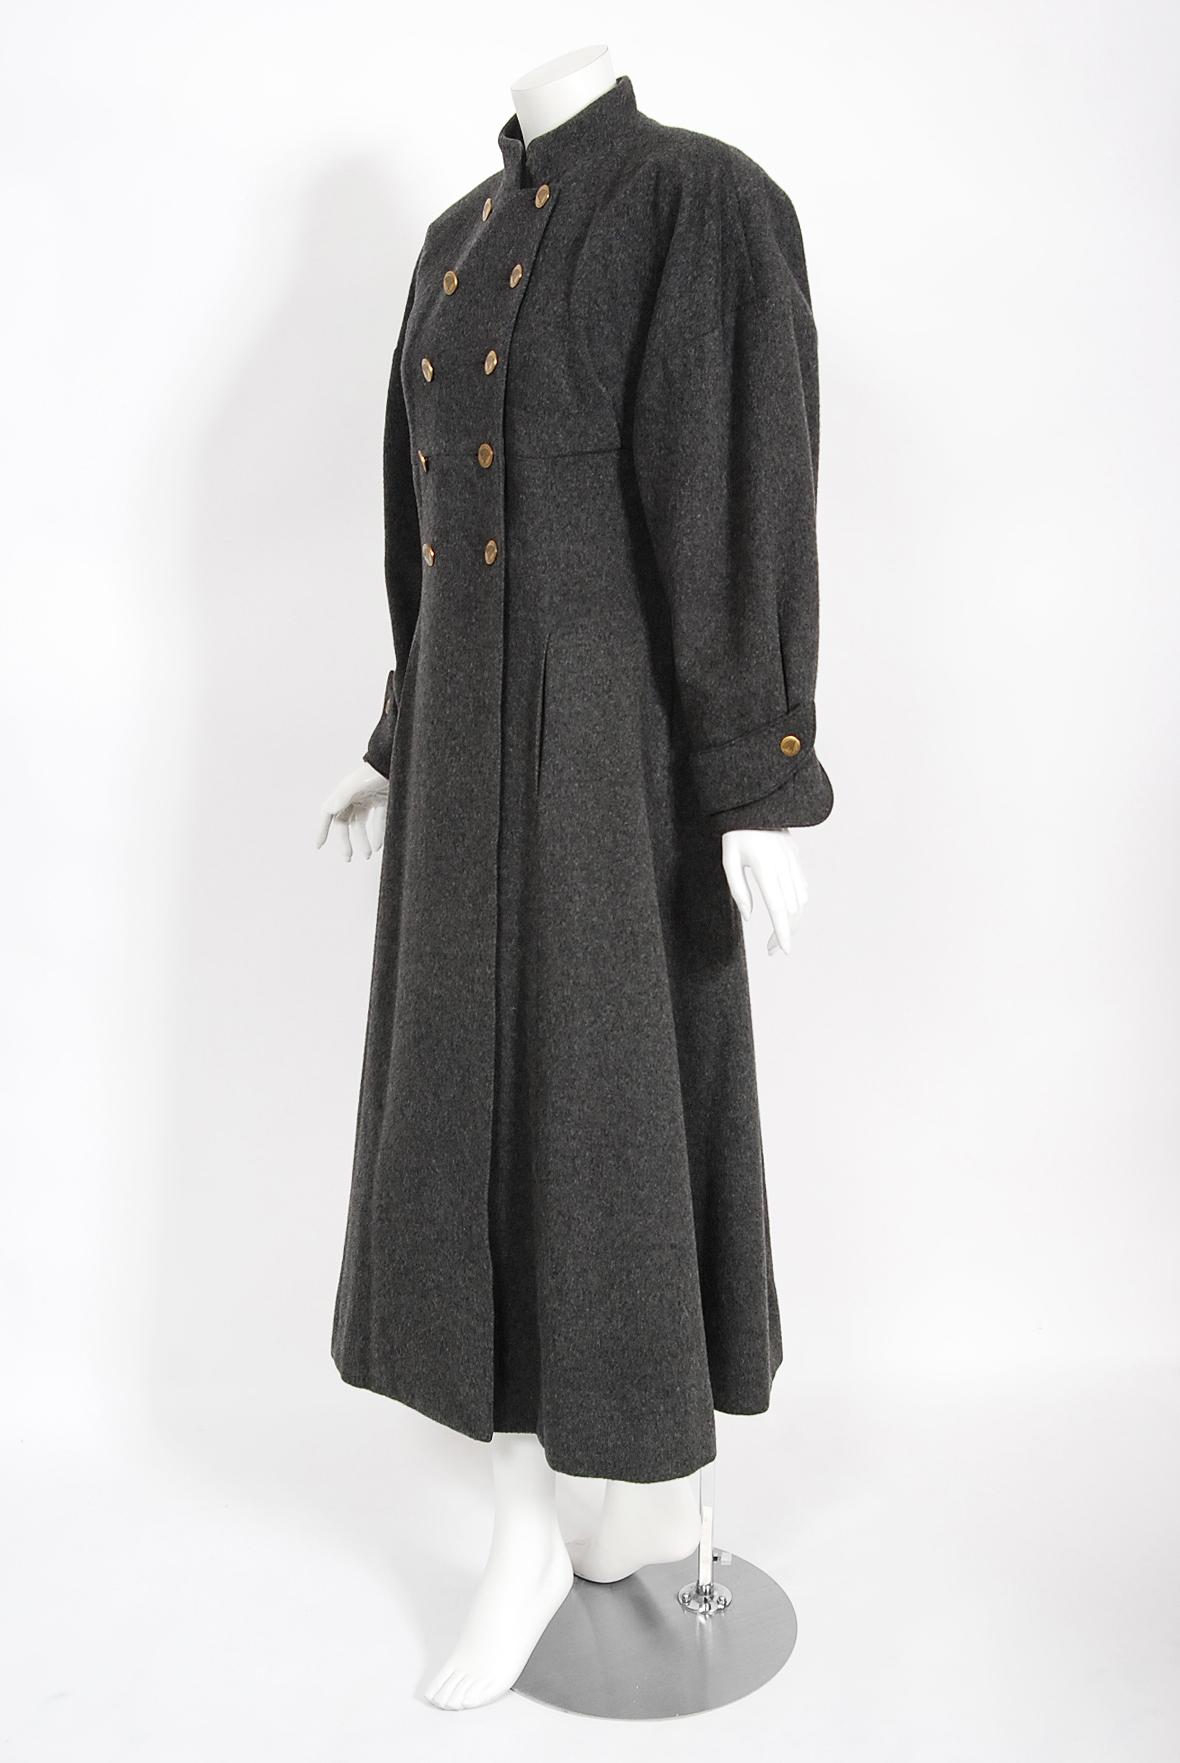 Women's Vintage 1990s Karl Lagerfeld Charcoal Gray Wool Double Breasted Princess Coat 